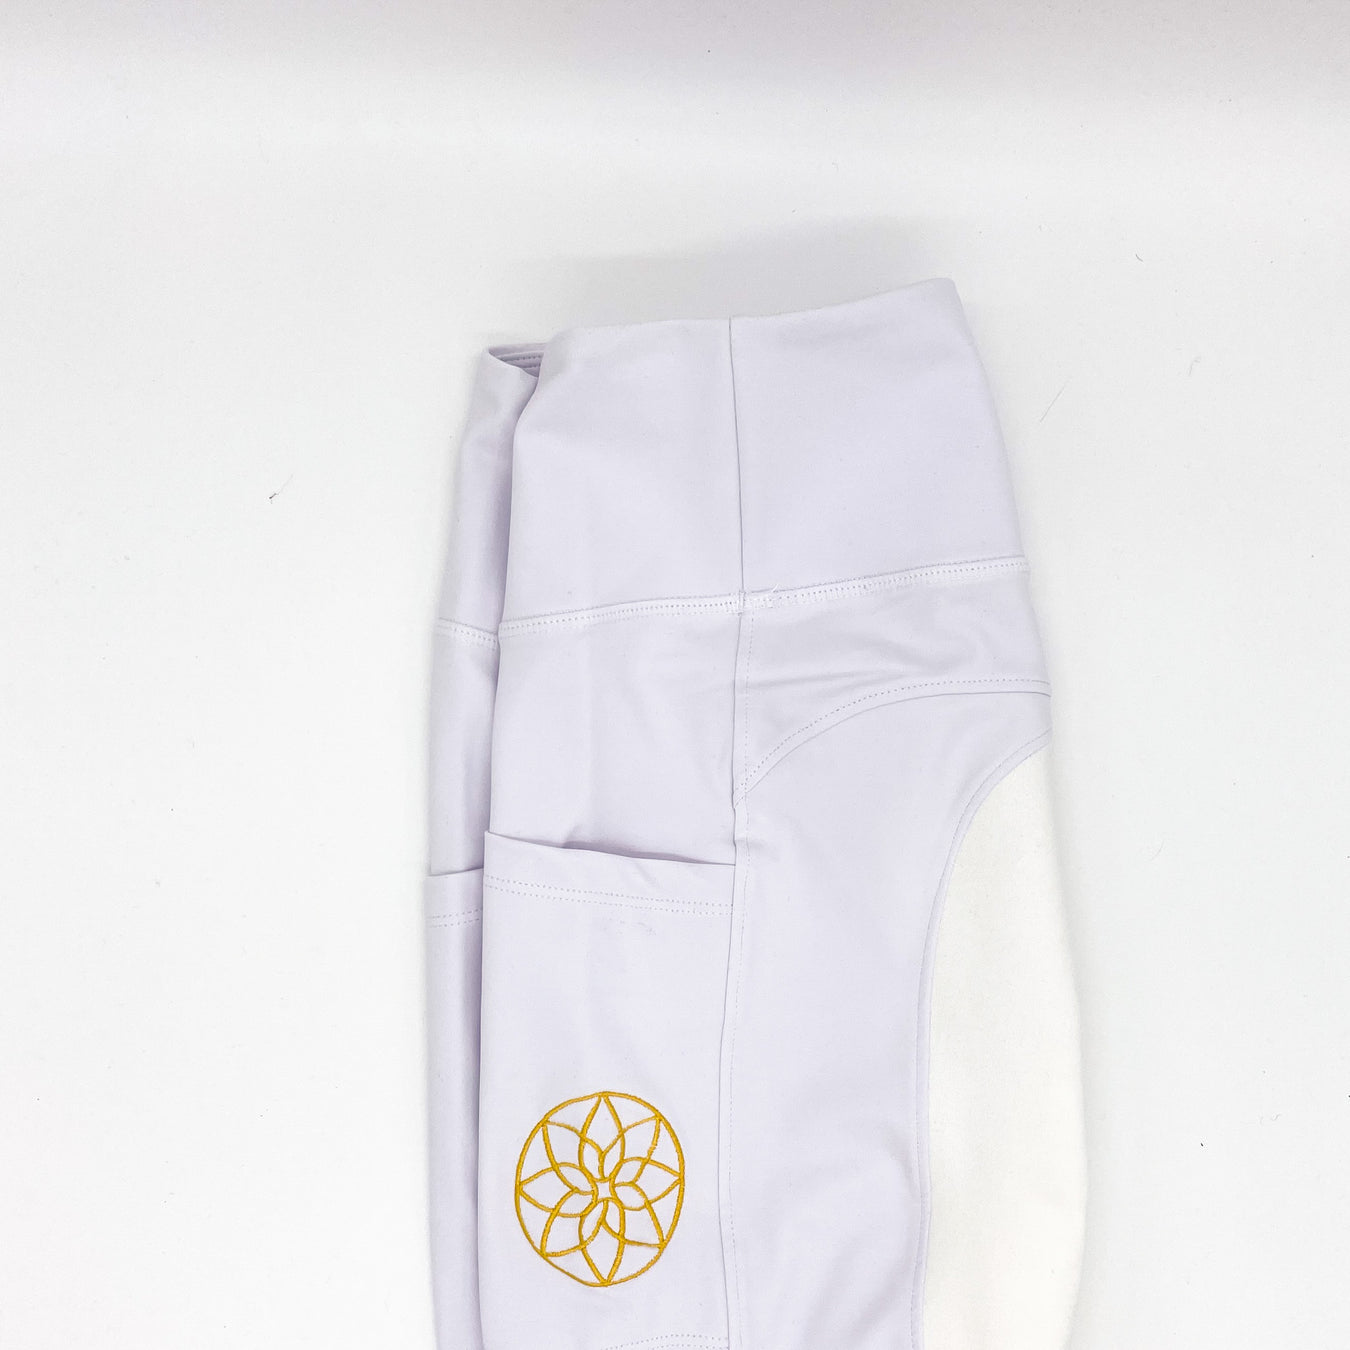 Breeches and riding leggings